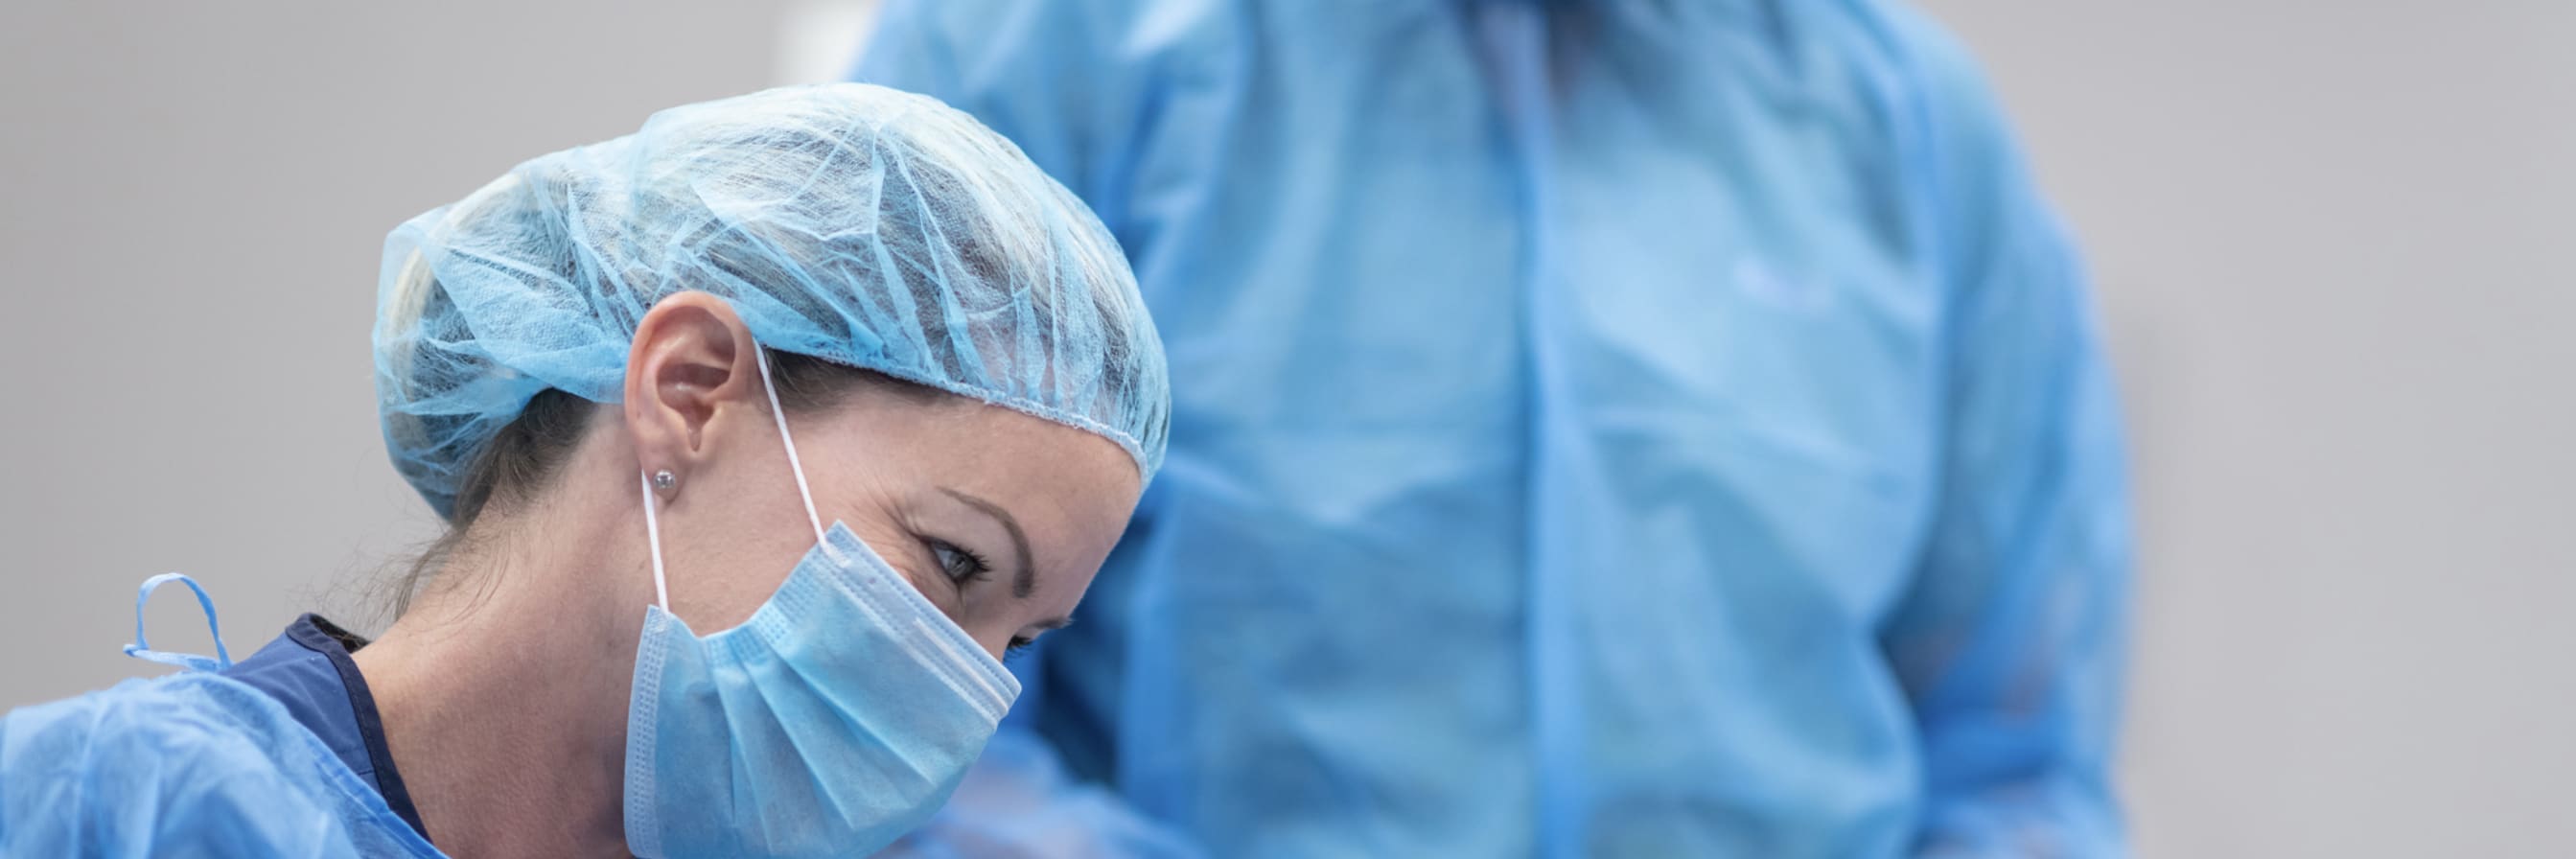 woman in surgical mask, gown and gloves holds patient's hand